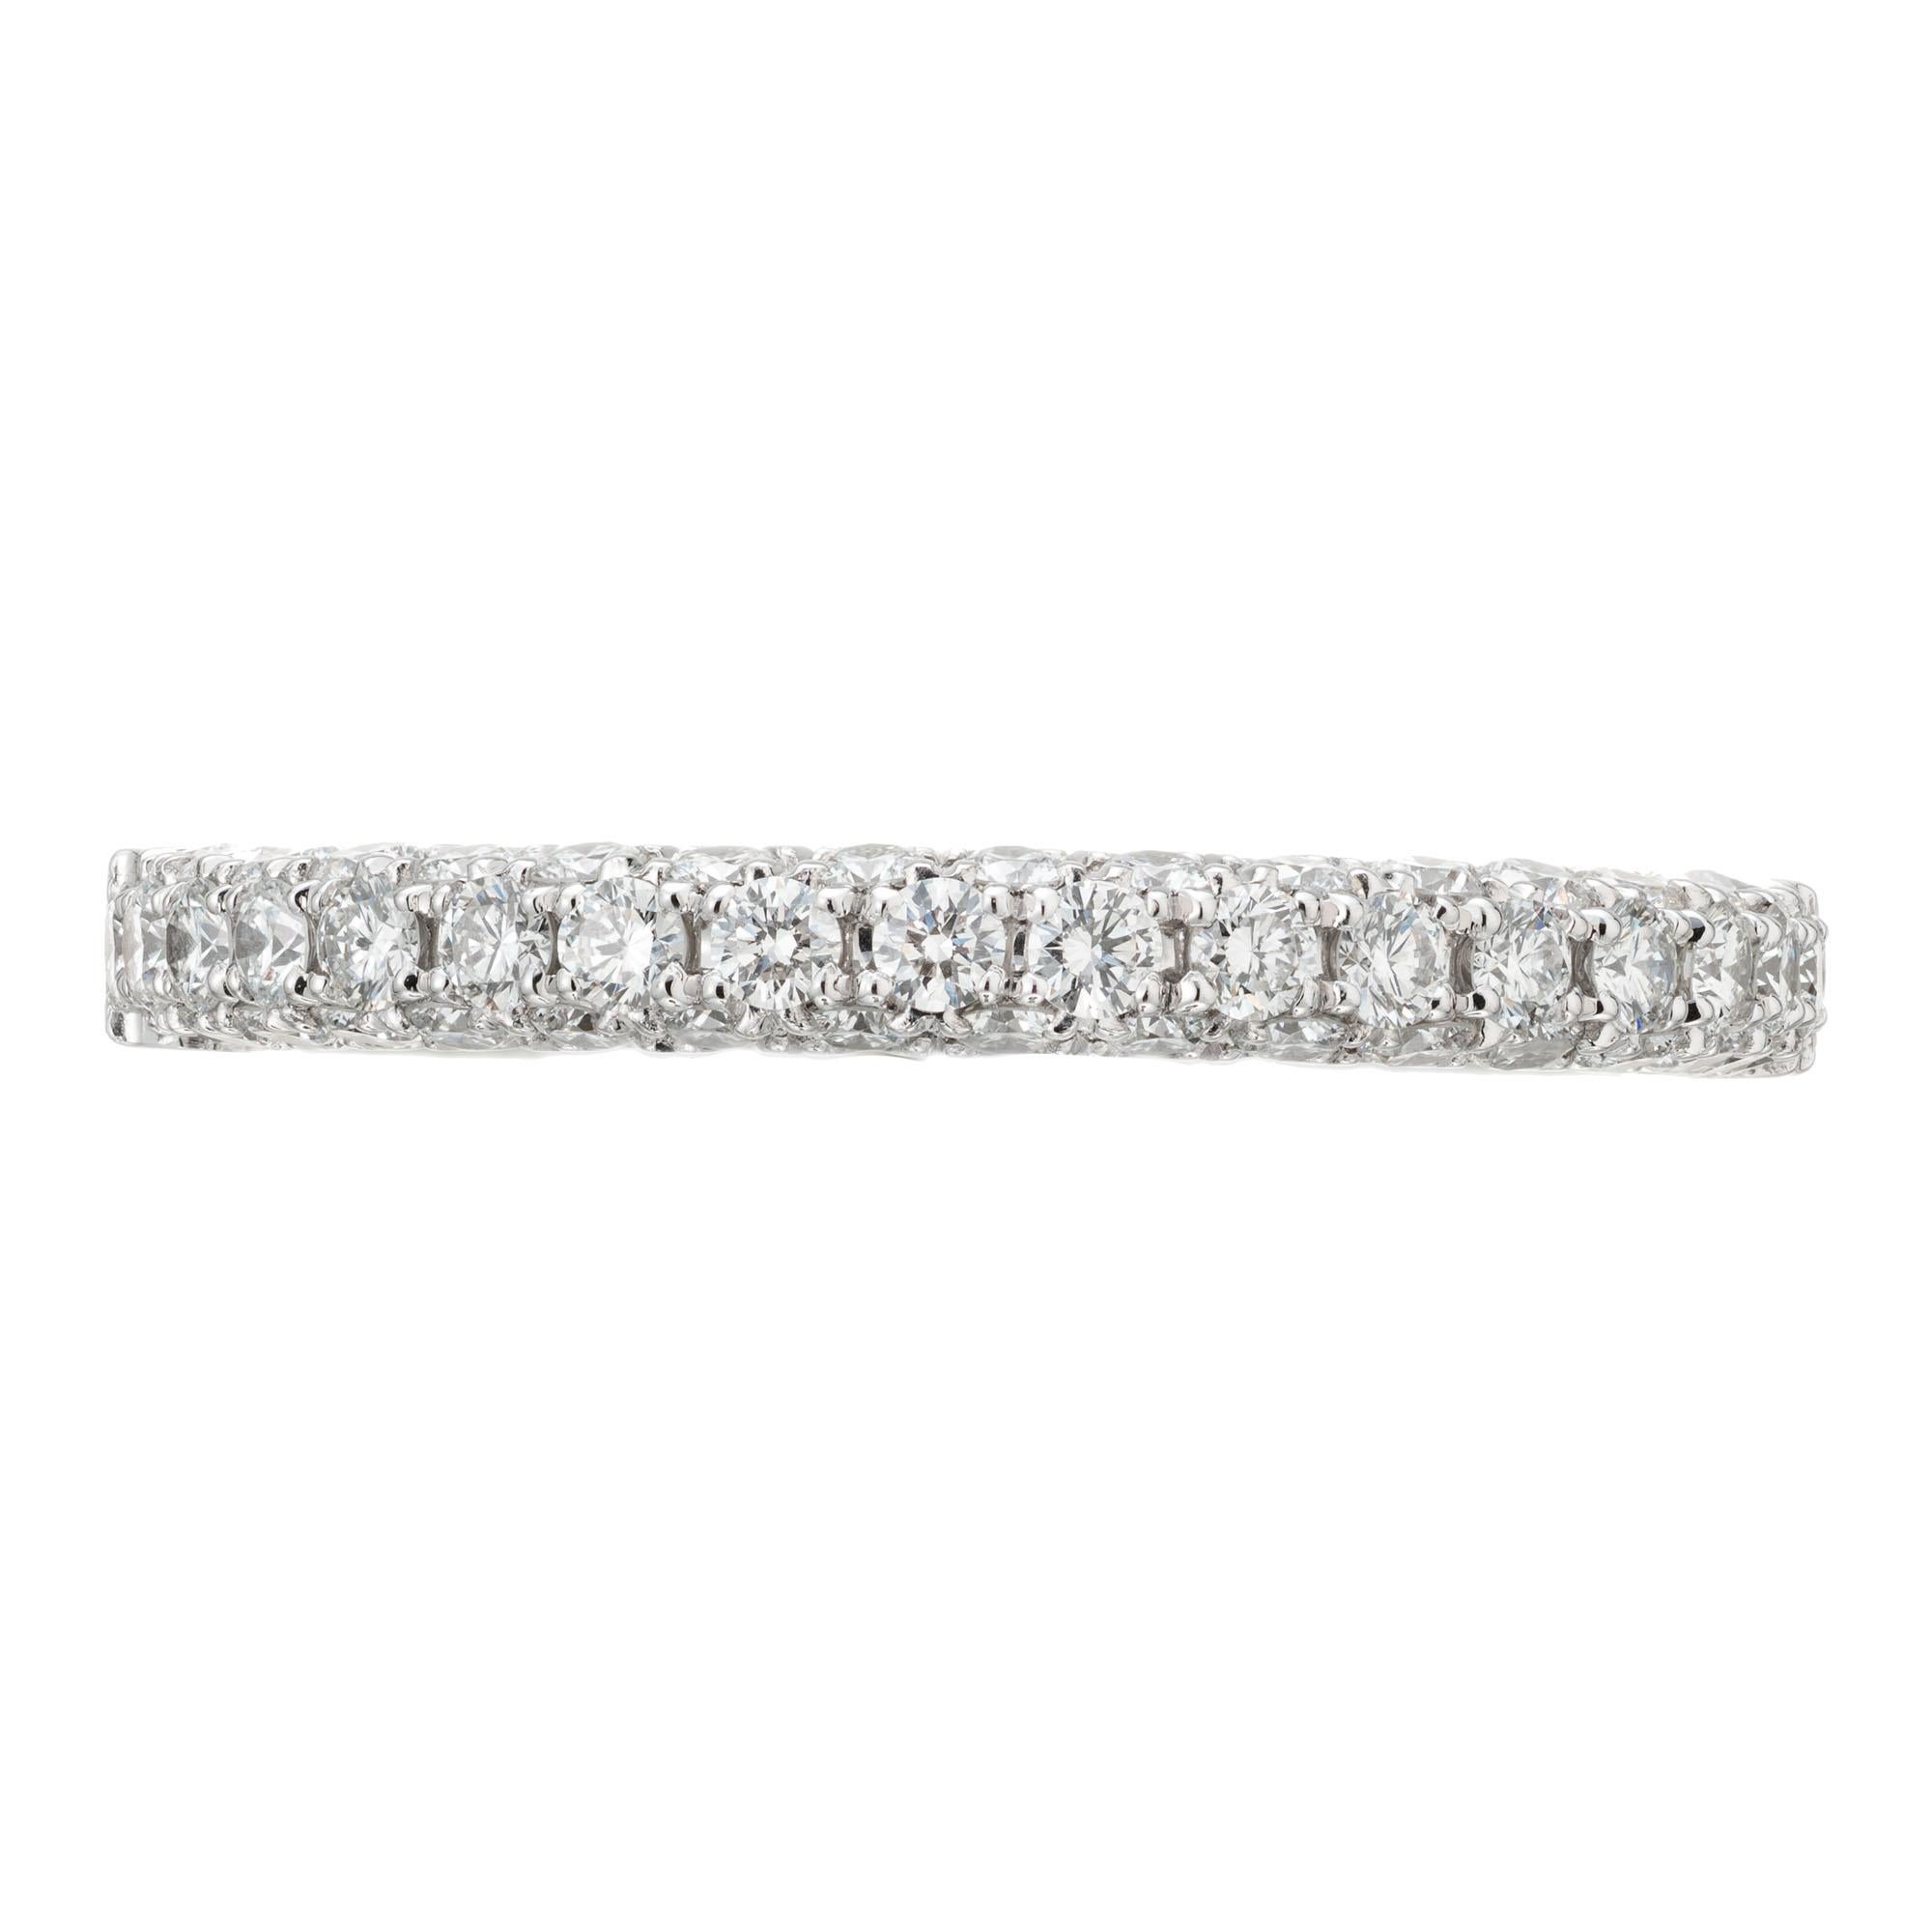 52 round diamond platinum wedding band ring. 52 bead set brilliant cut diamonds across the top and sides of the setting.

52 round brilliant cut diamonds, G VS approx. .65cts
Size 6 and sizable
Platinum 
Stamped: PLAT
5.2 grams
